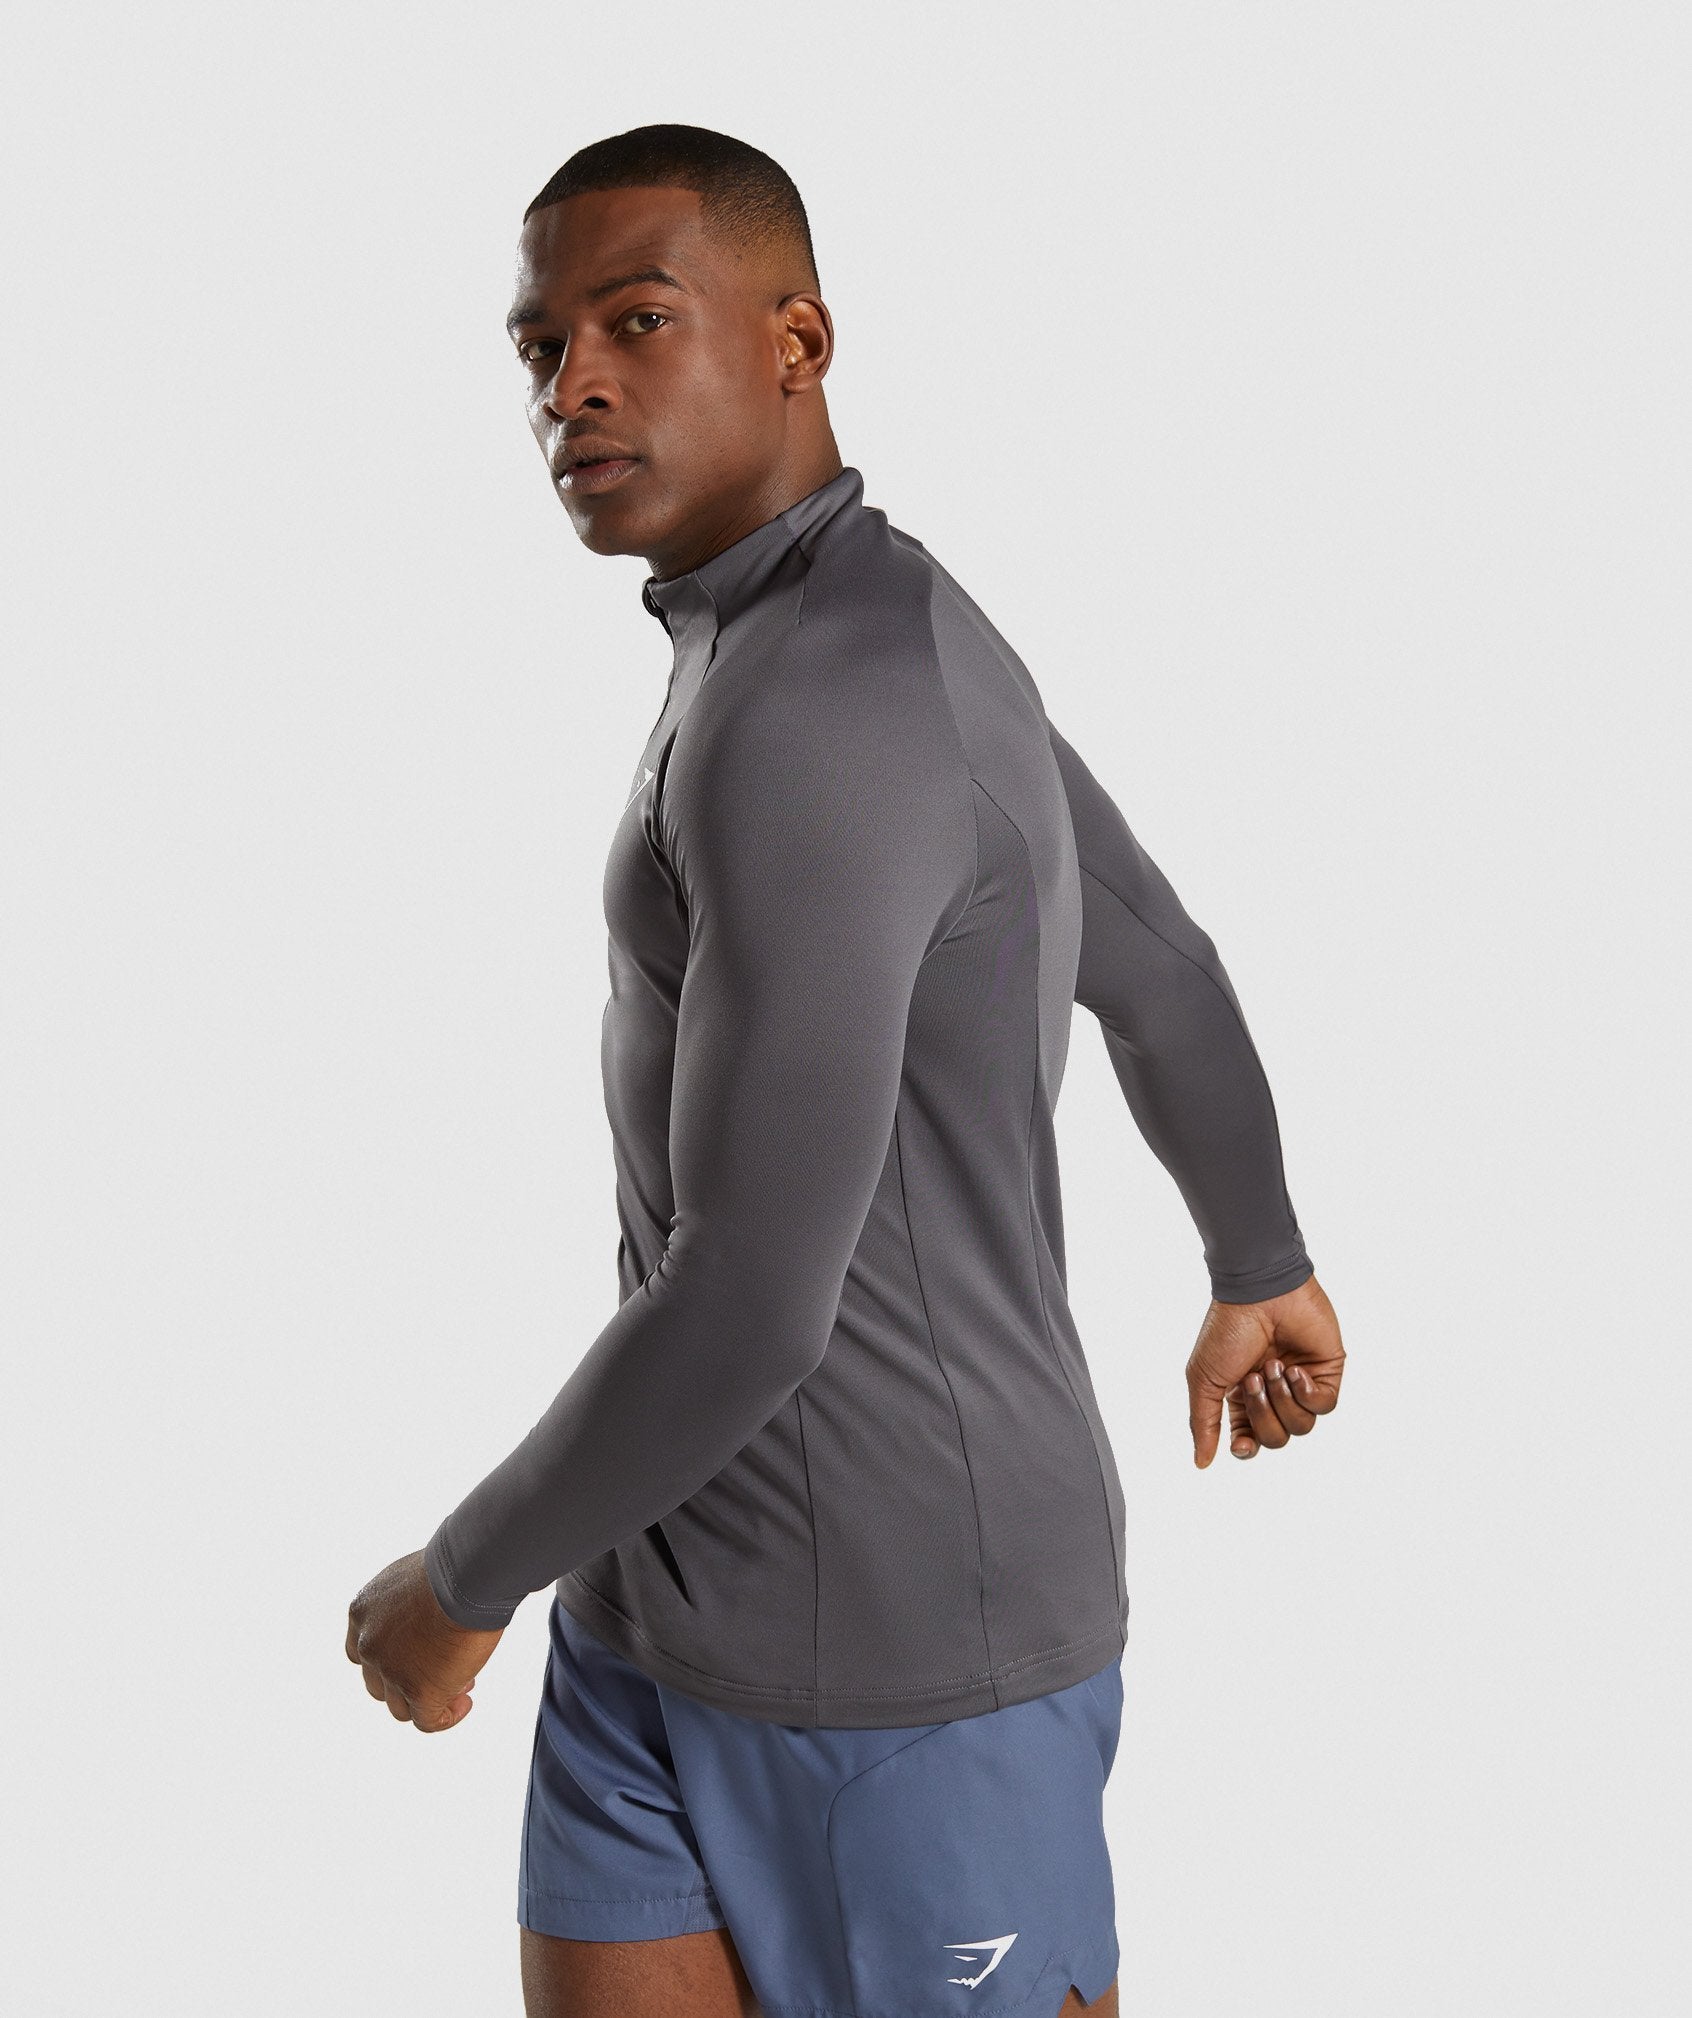 Advanced 1/4 Zip Pullover in Charcoal - view 3